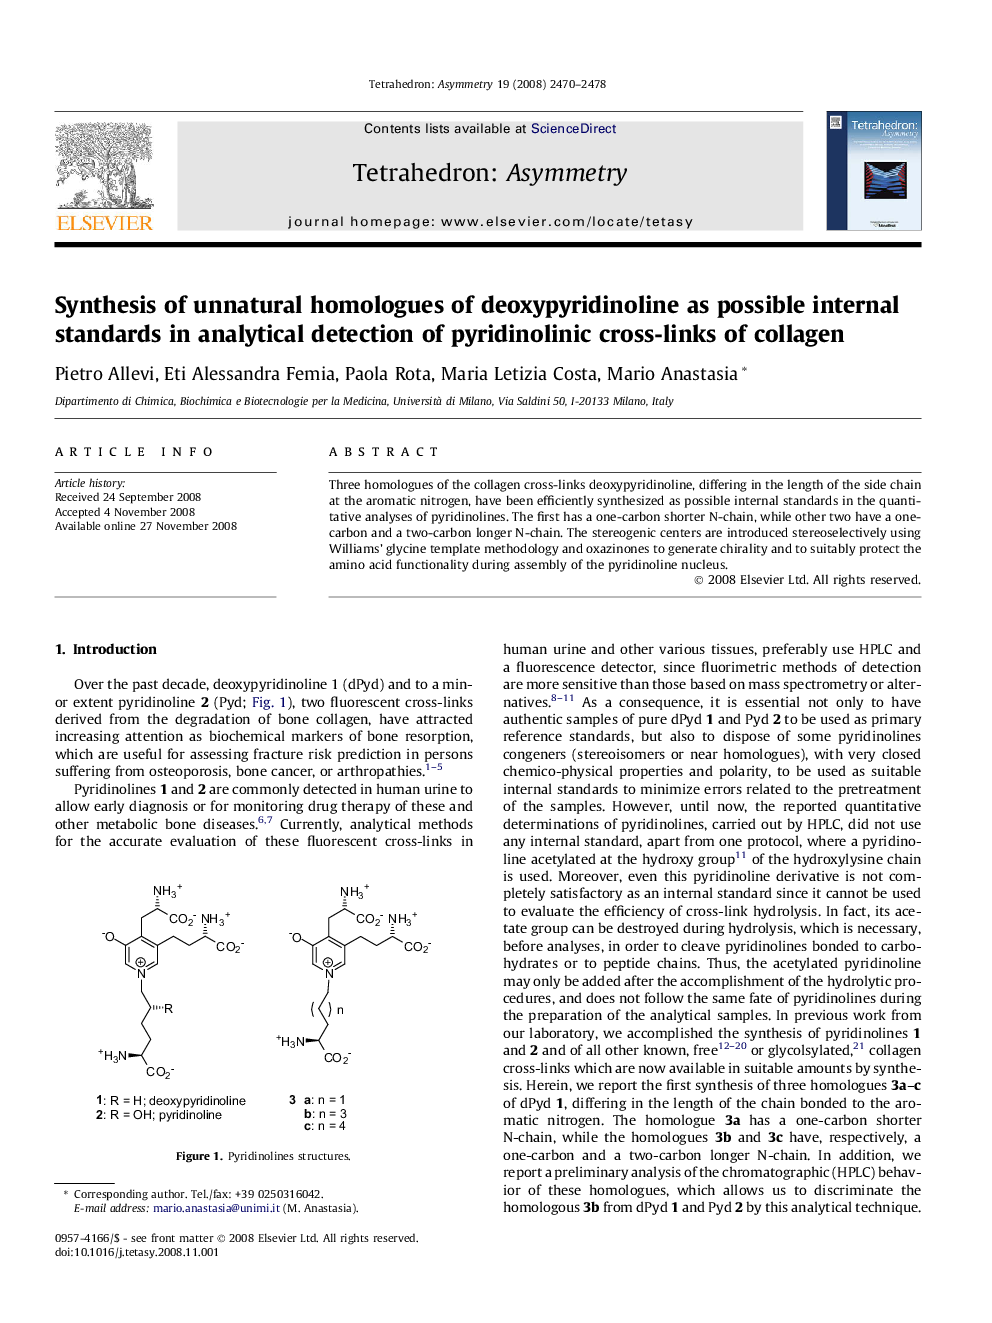 Synthesis of unnatural homologues of deoxypyridinoline as possible internal standards in analytical detection of pyridinolinic cross-links of collagen